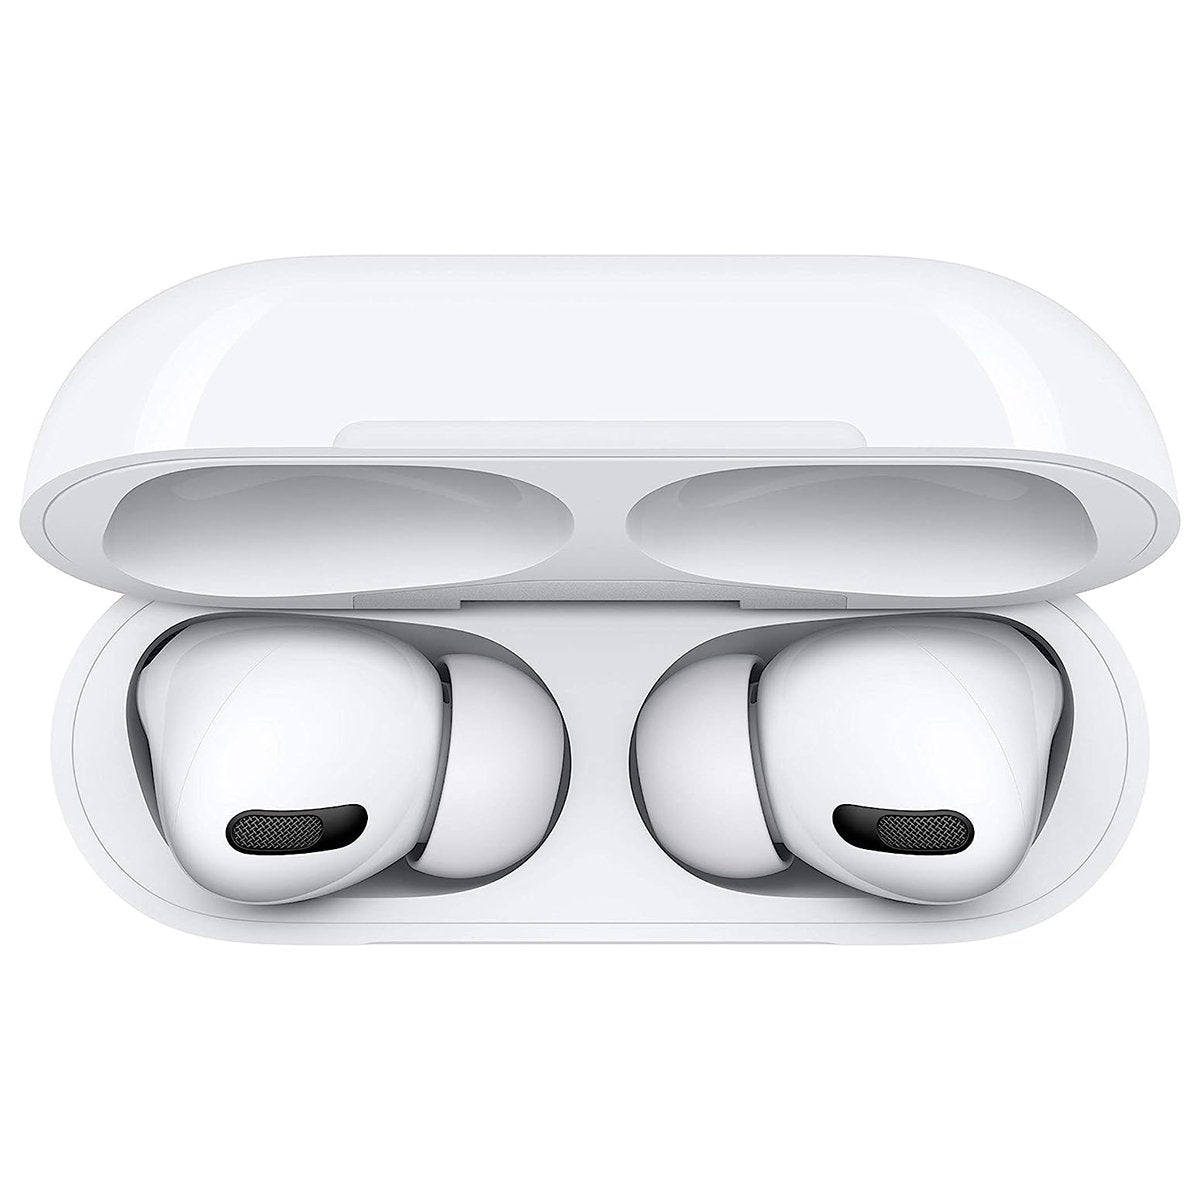 Refurbished Apple AirPods Pro with MagSafe Charging Case